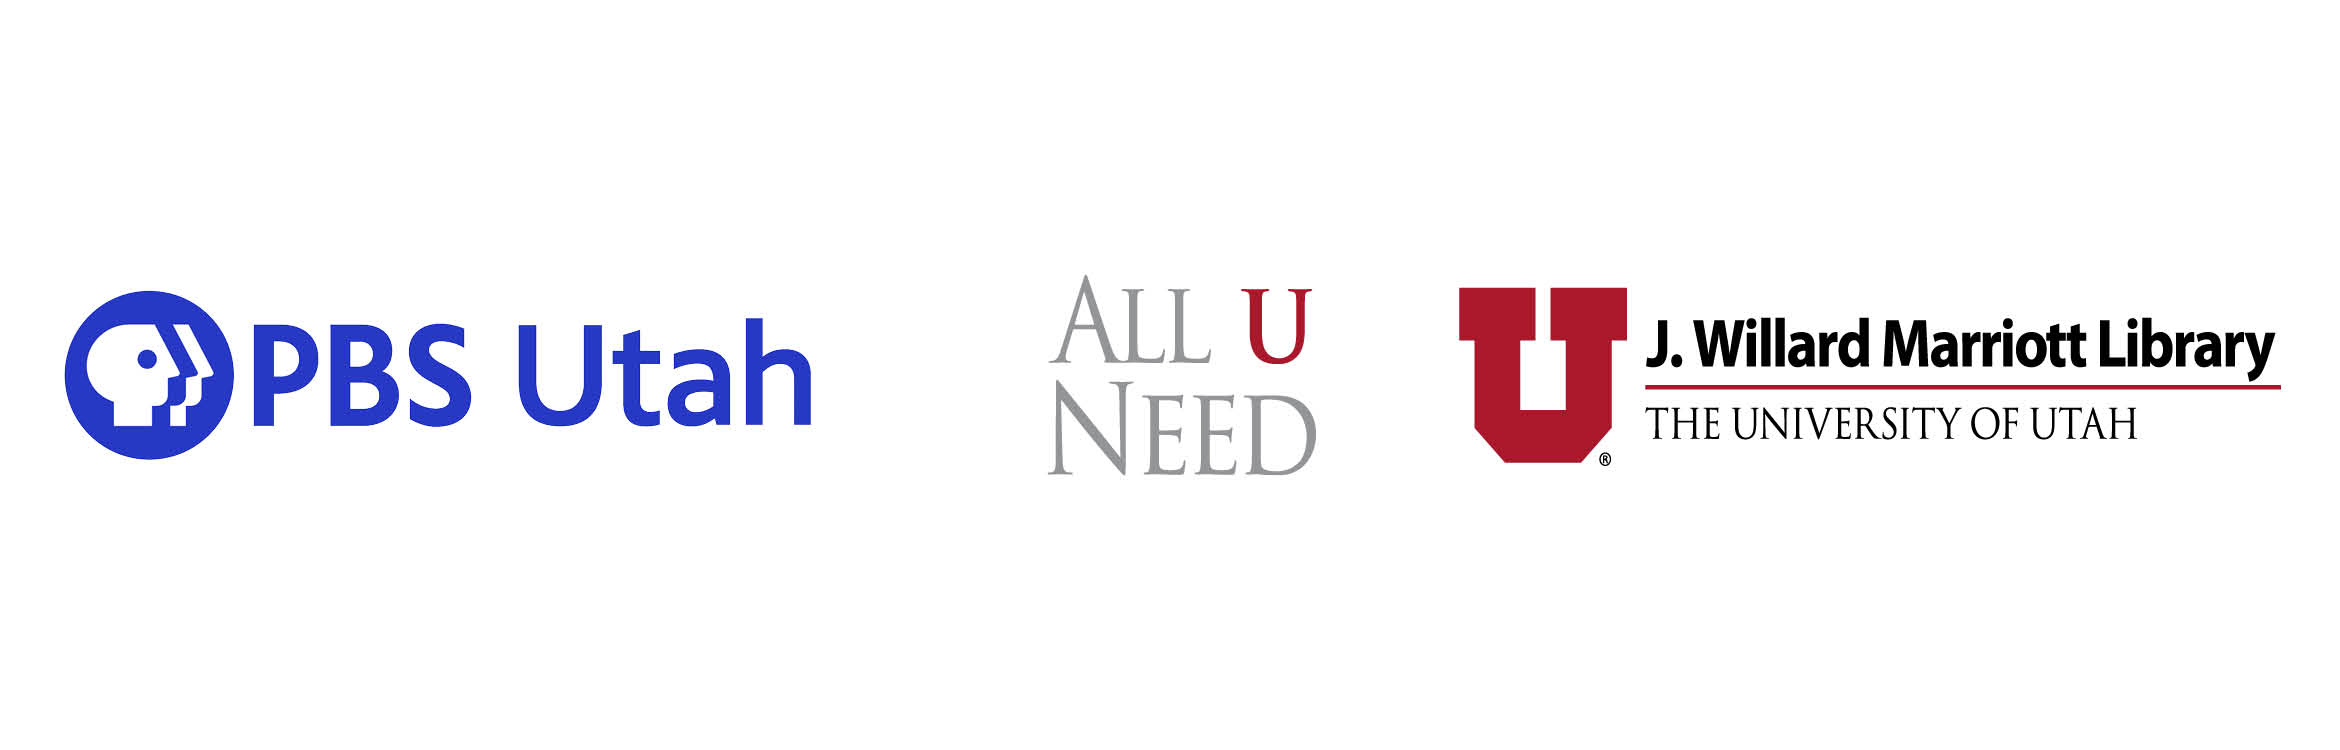 A blue PBS logo is on the left and a black, red and grey U of U Library logo is on the right.